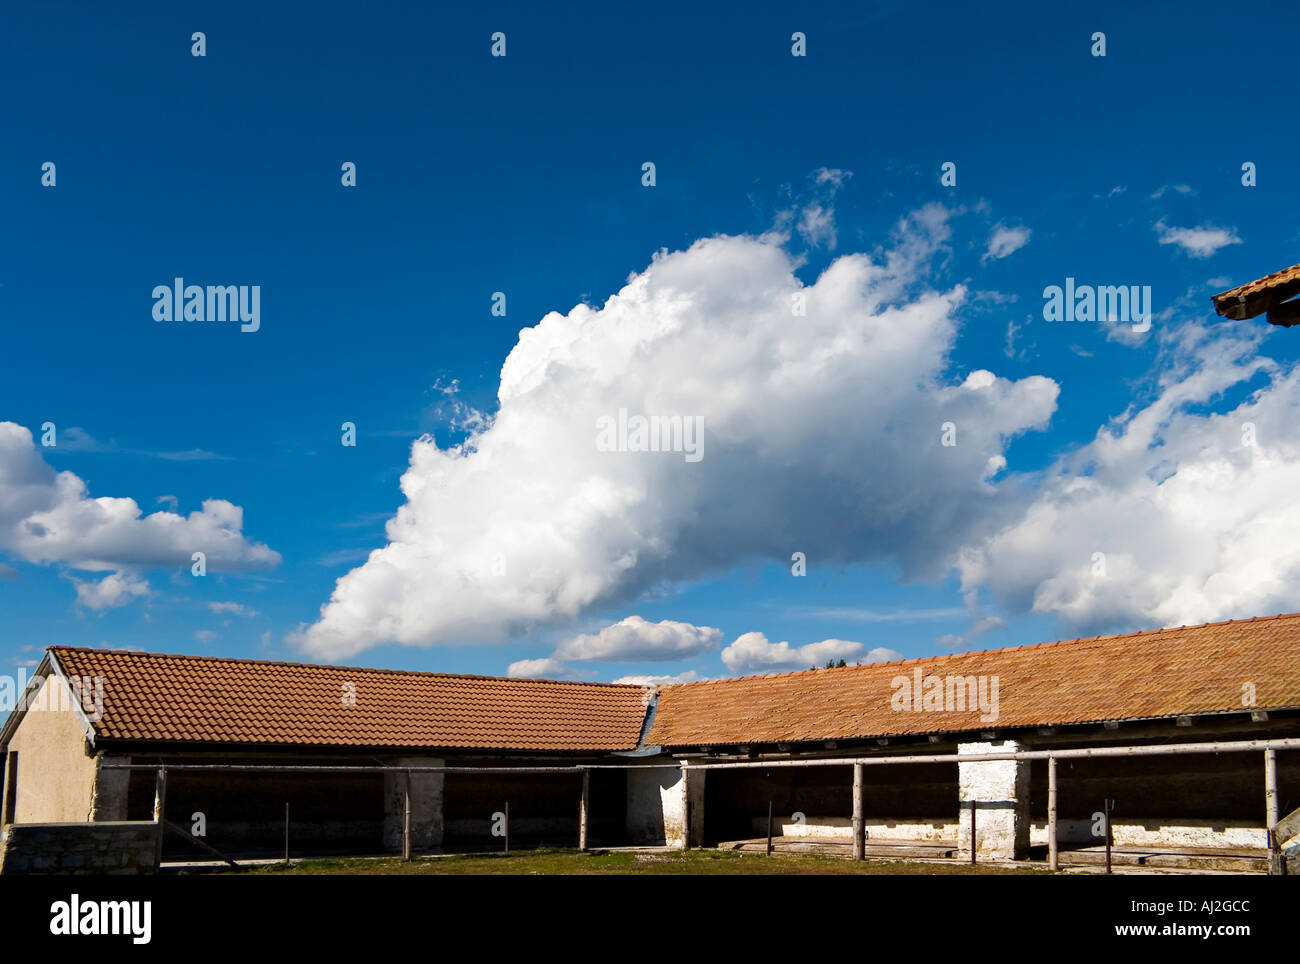 red mountain stable small farm with large roof and tile with blue sky and clouds Stock Photo